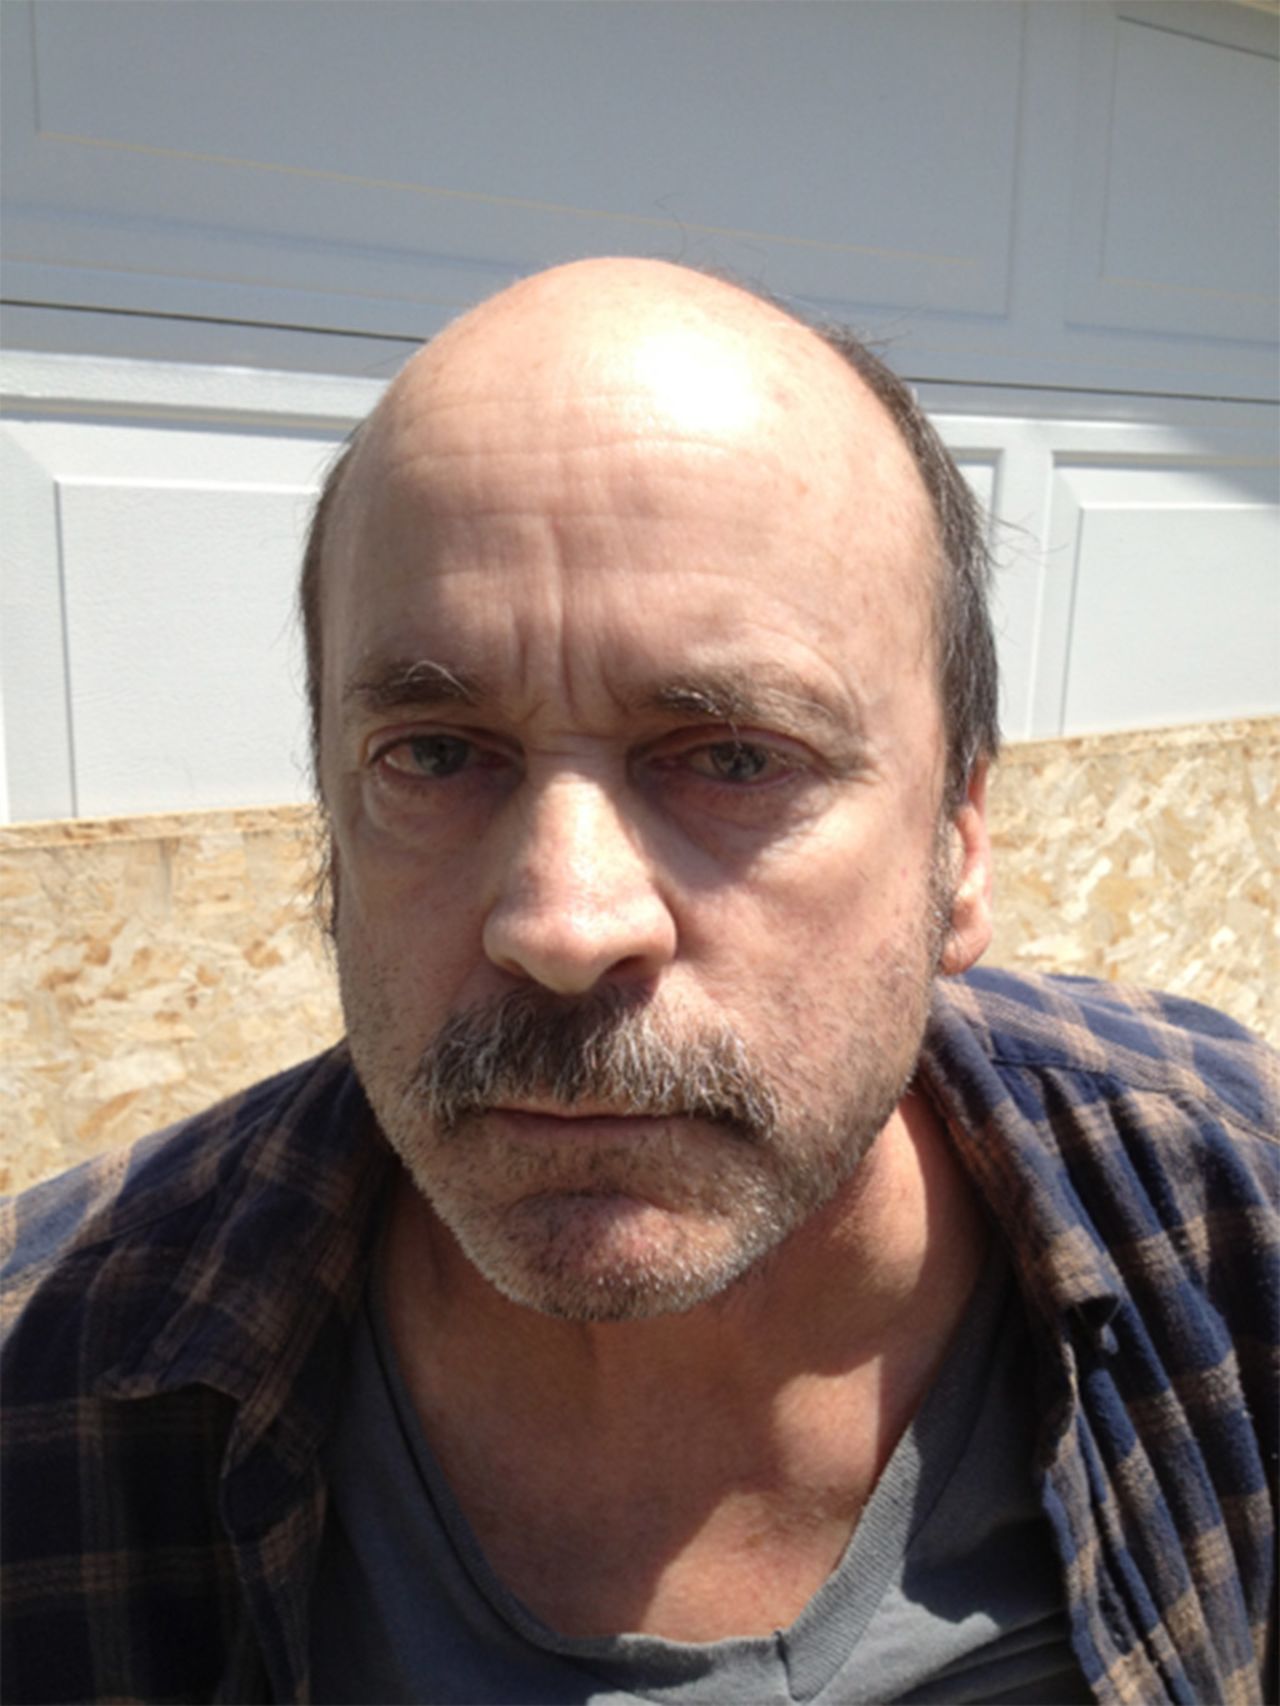 Federal authorities on Thursday, May 16, said they had arrested David John Stevens, 58, of Salinas, and believe him to be the man in four videos allegedly depicted sexual assaults on a young girl.